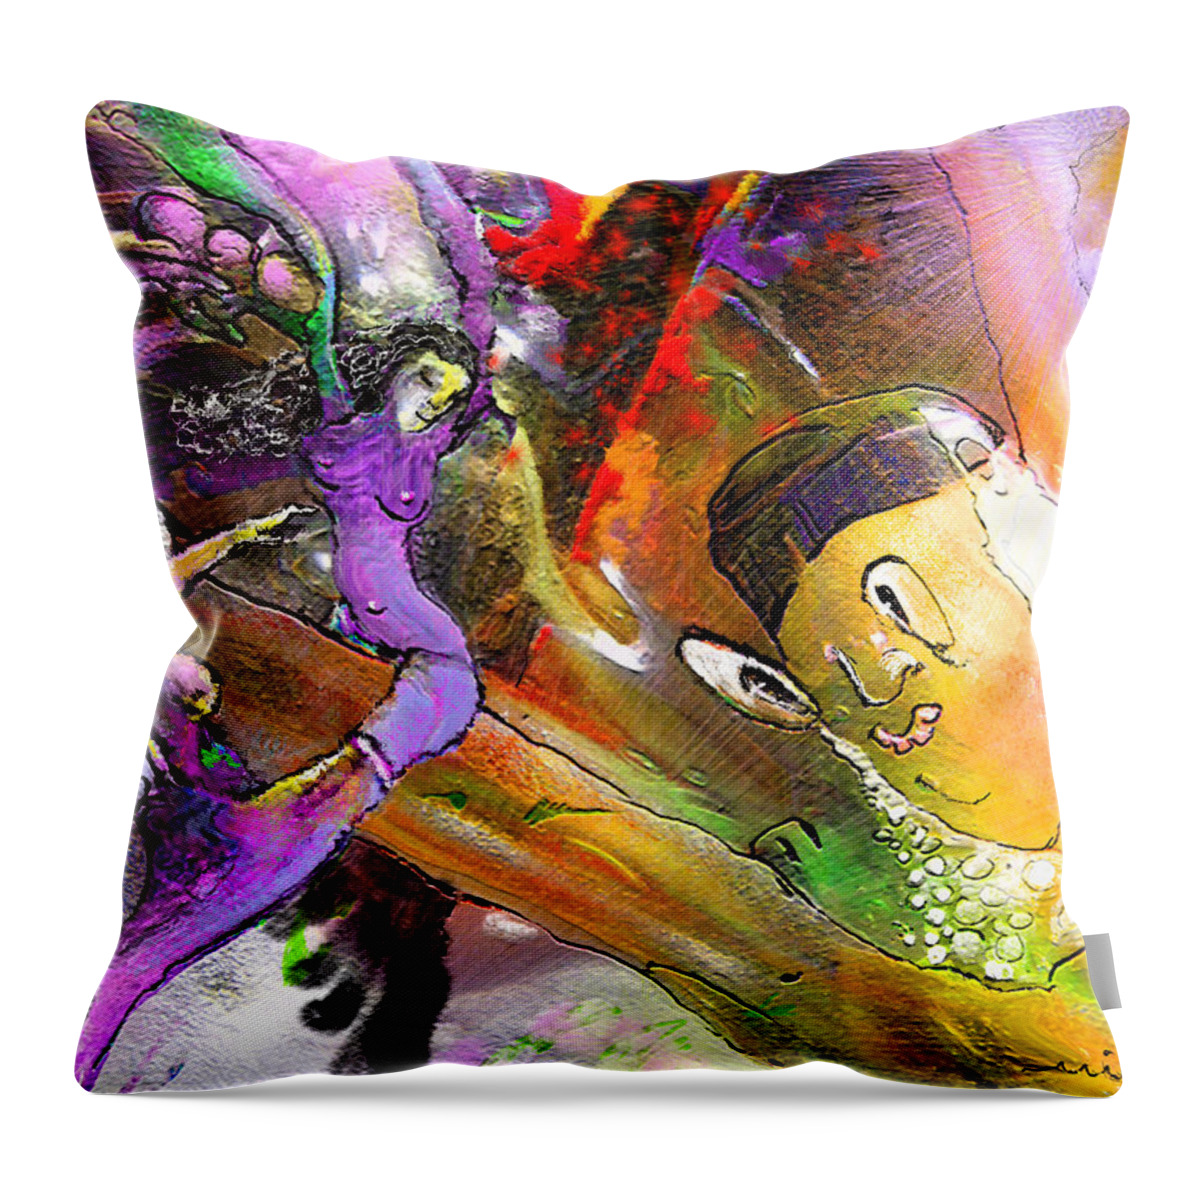 Fantasy Throw Pillow featuring the painting The Sweeties 02 by Miki De Goodaboom